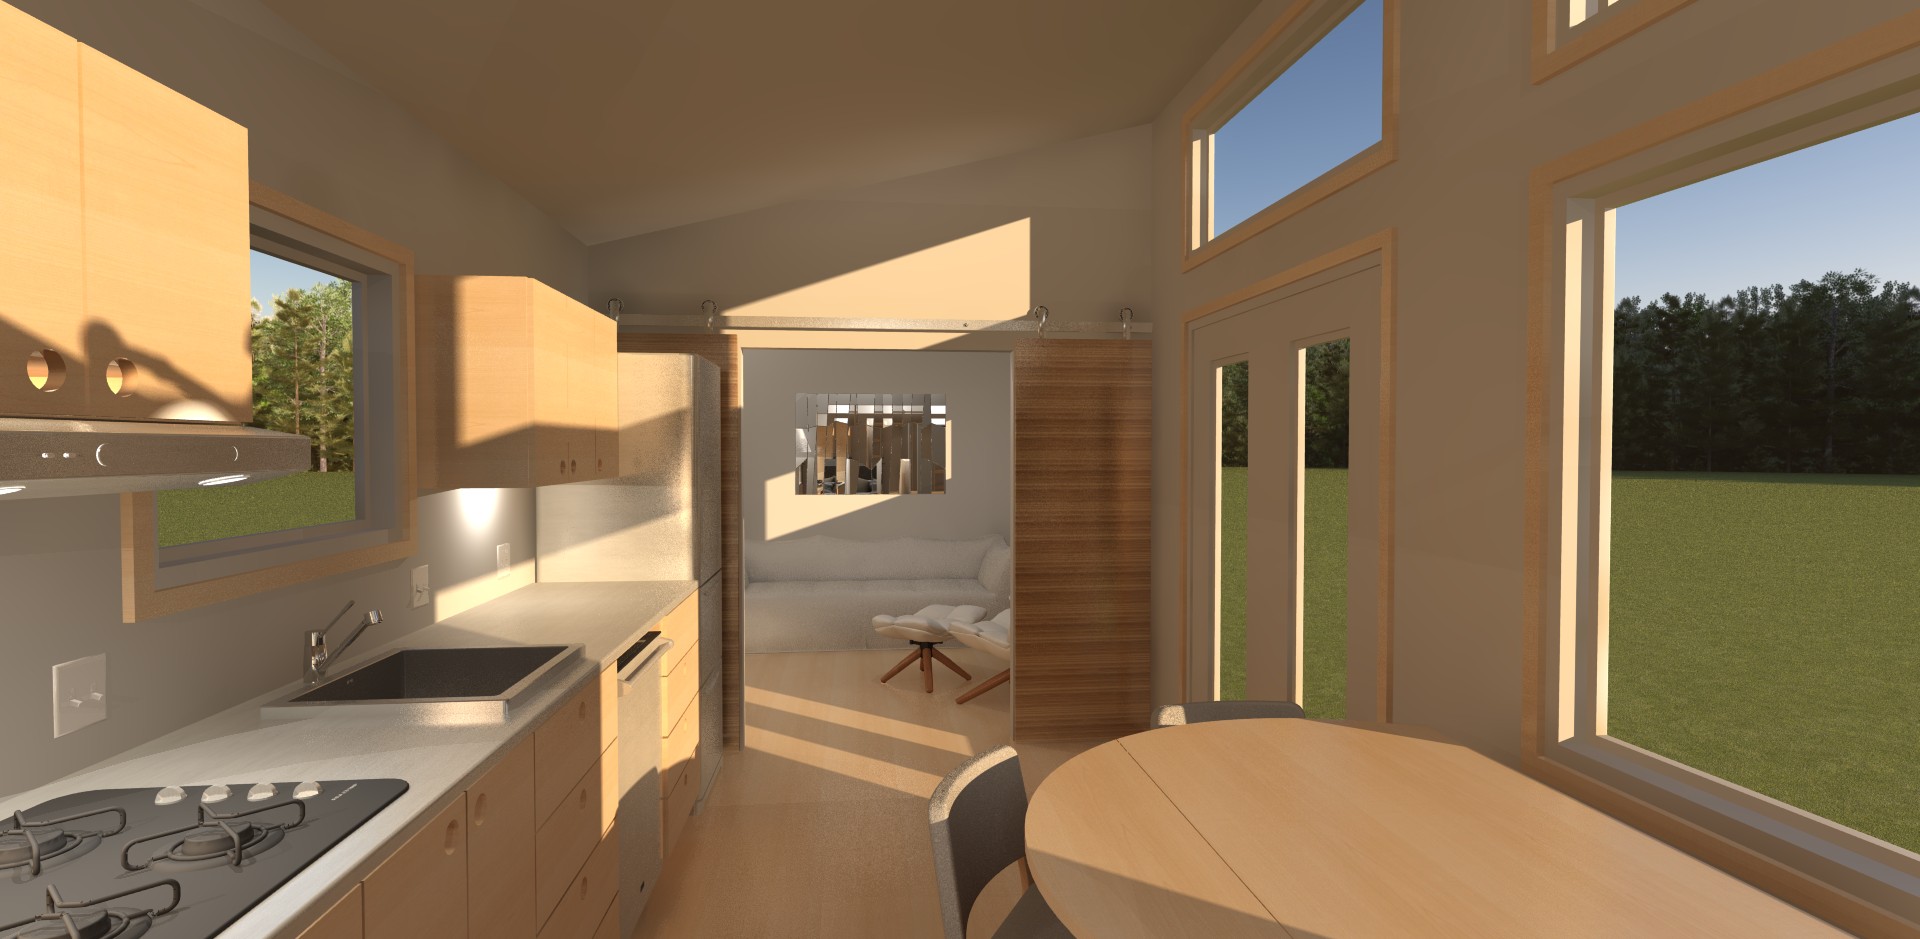 Design Guidelines for a Net Zero Tiny House